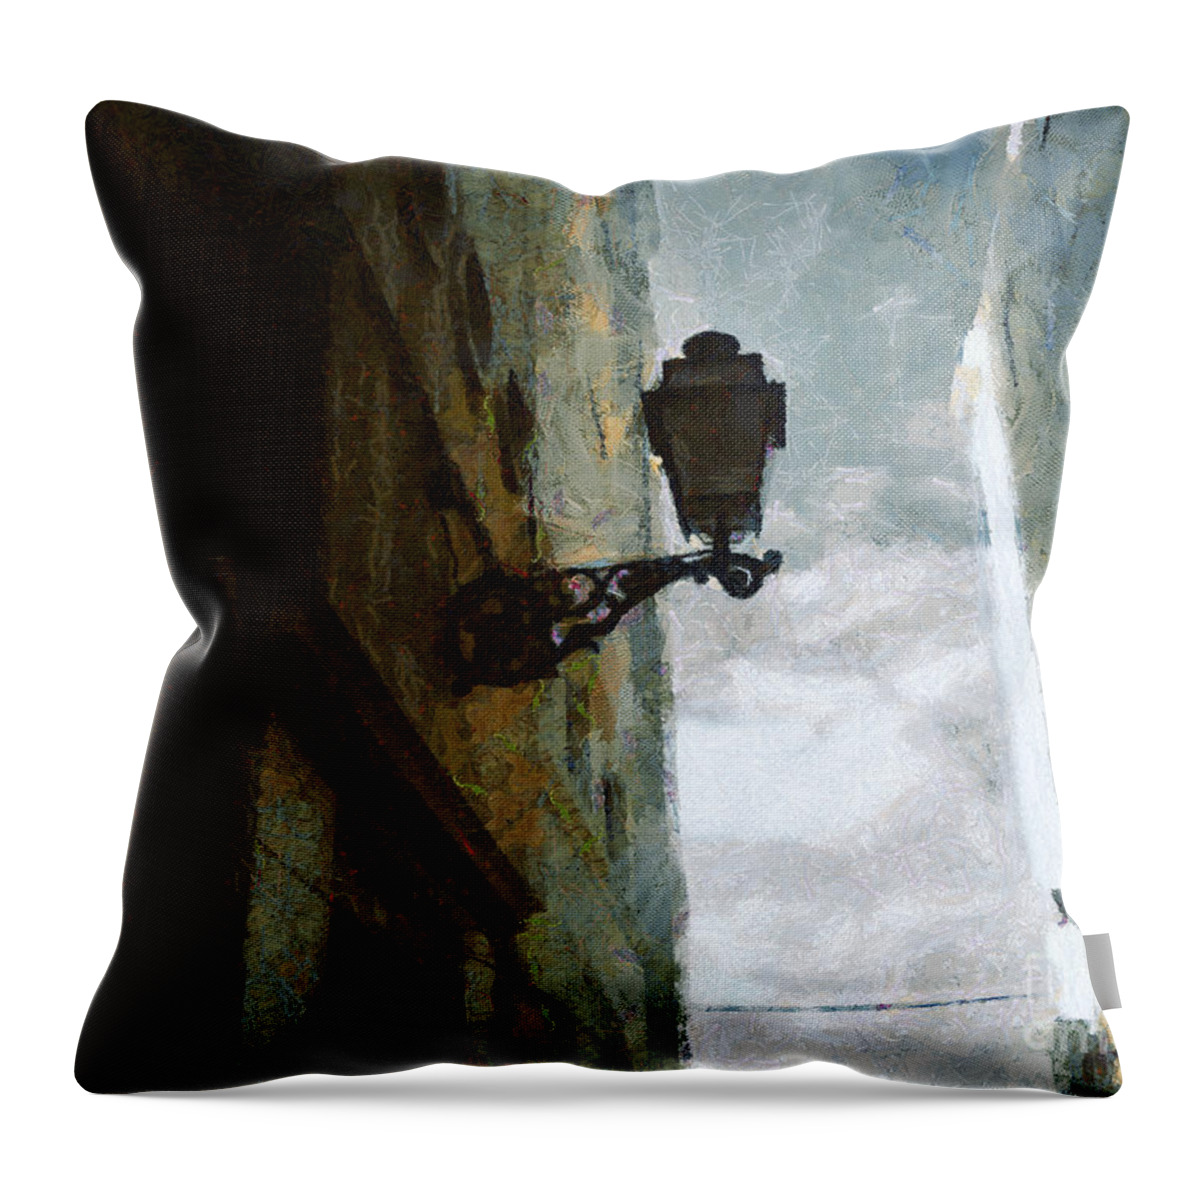 Painting Throw Pillow featuring the painting Old City Street by Dimitar Hristov